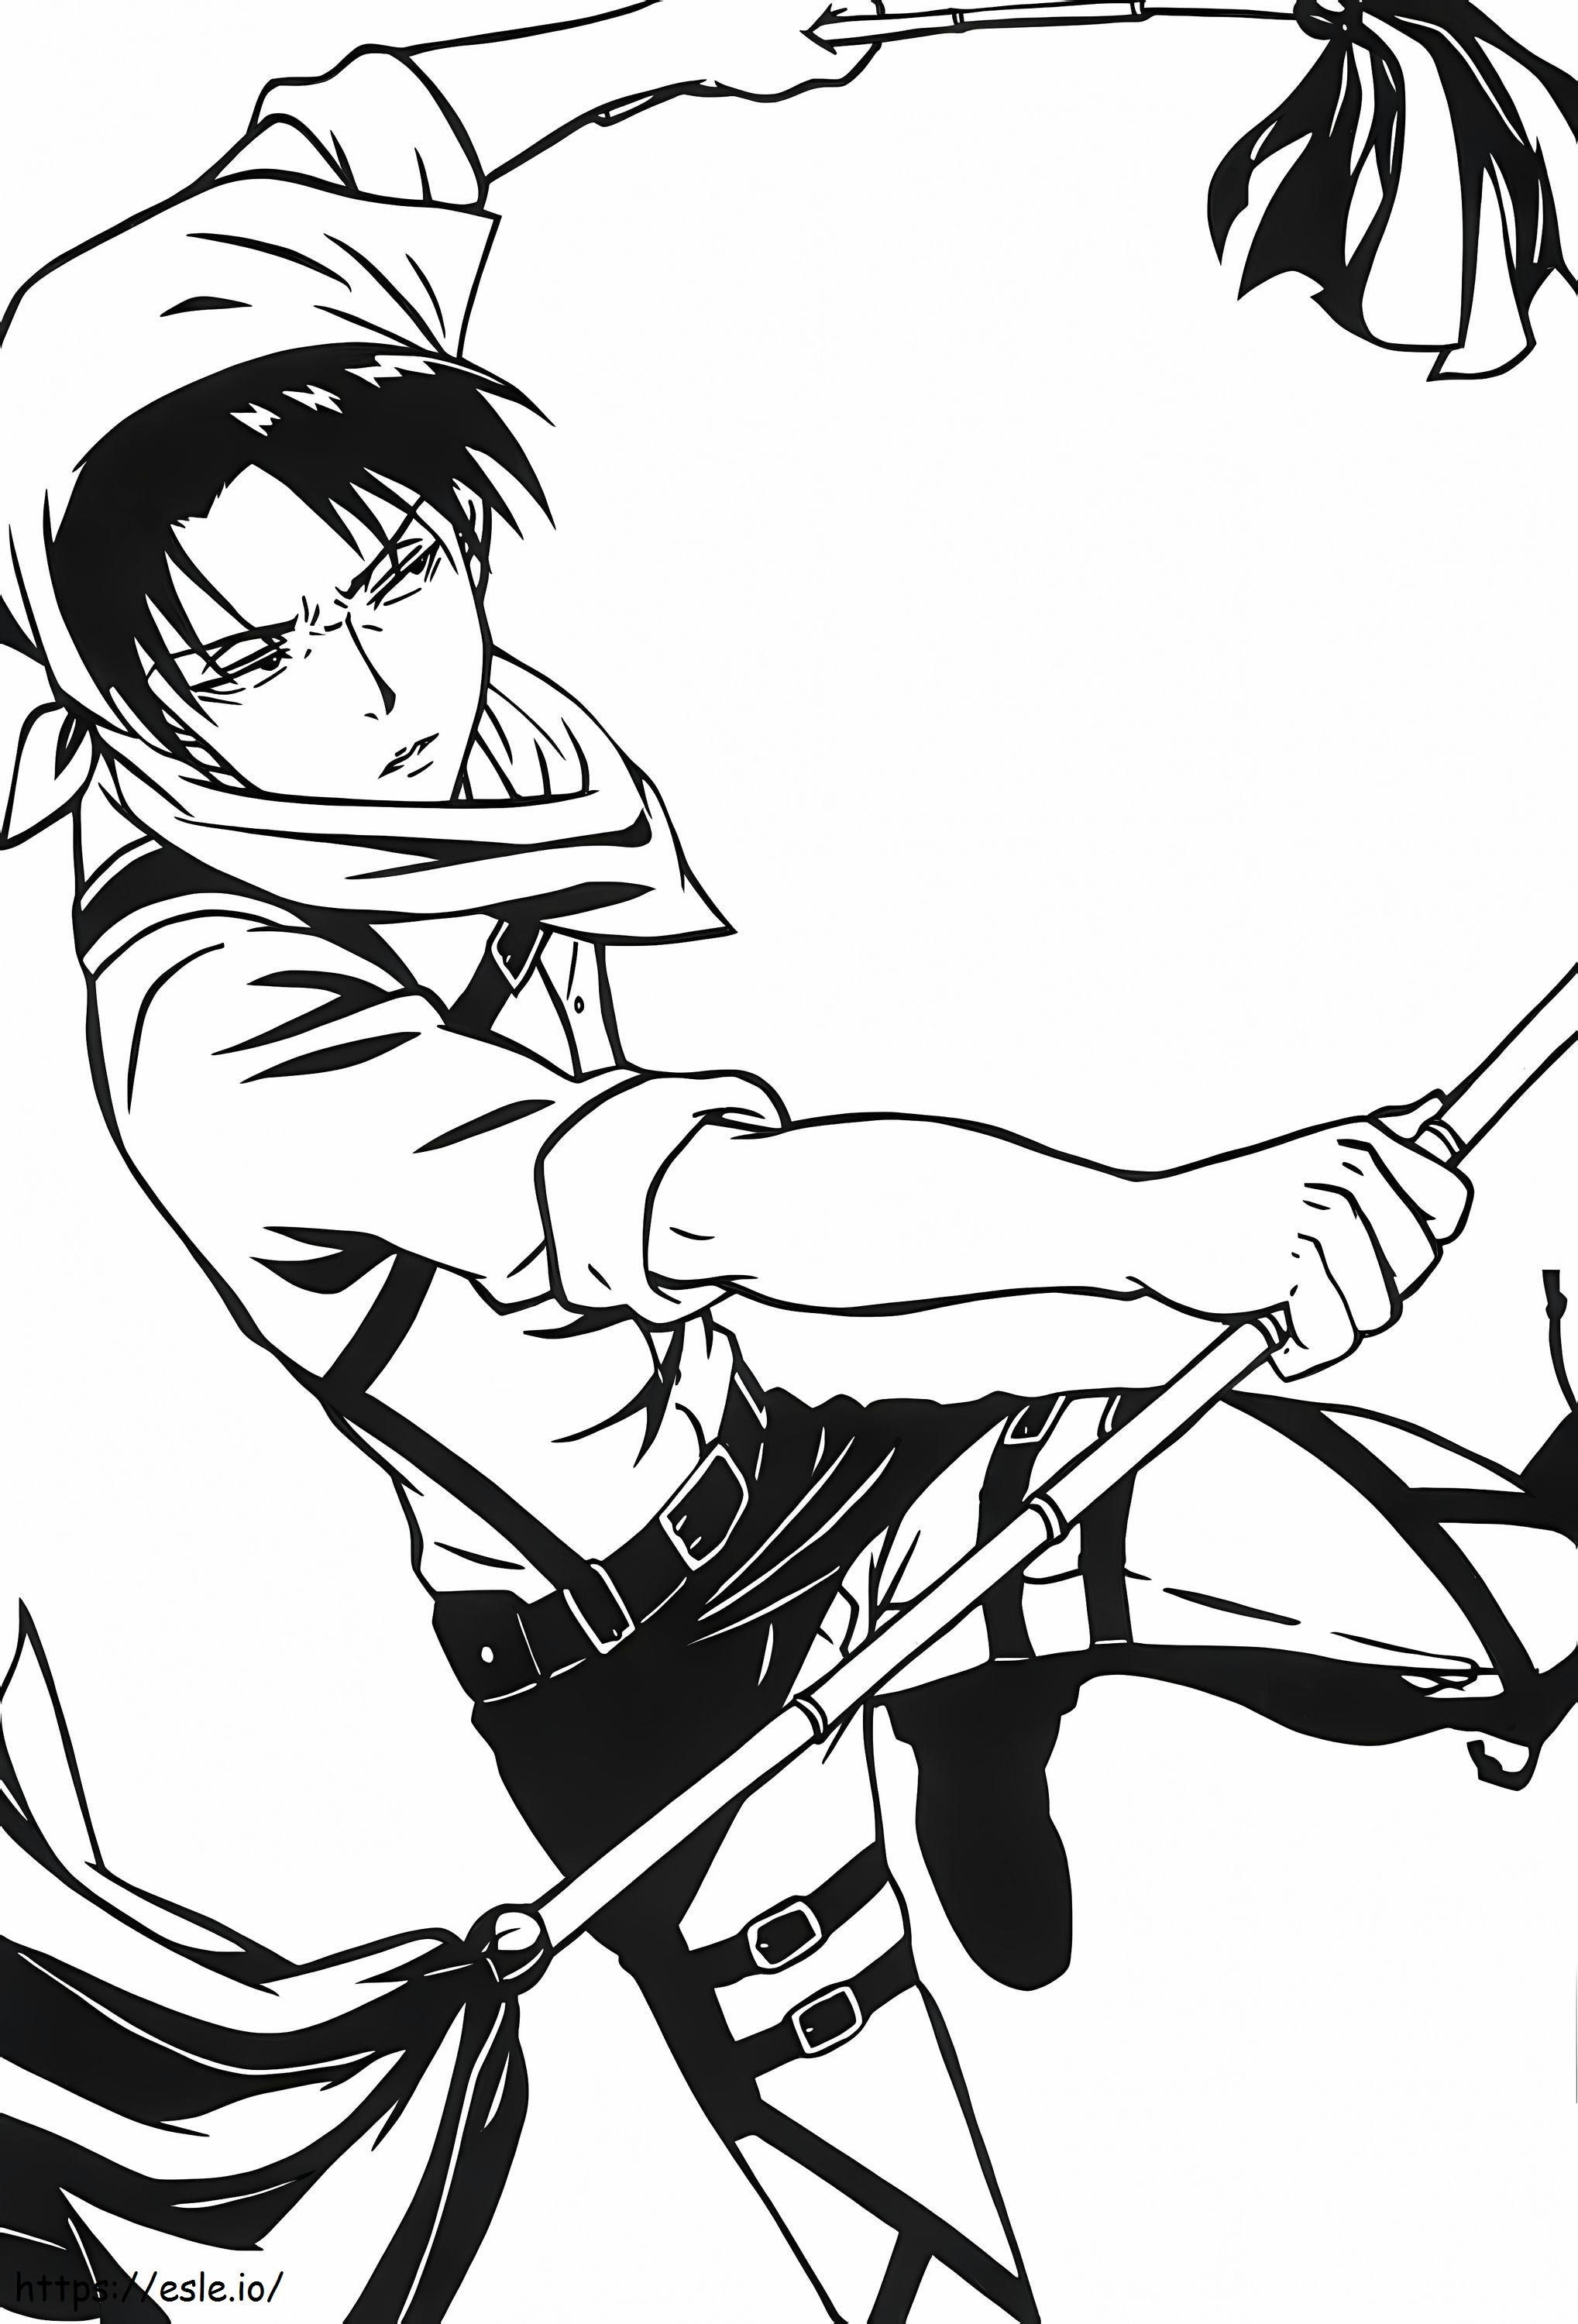 Levi Ackerman From Attack On Titan coloring page